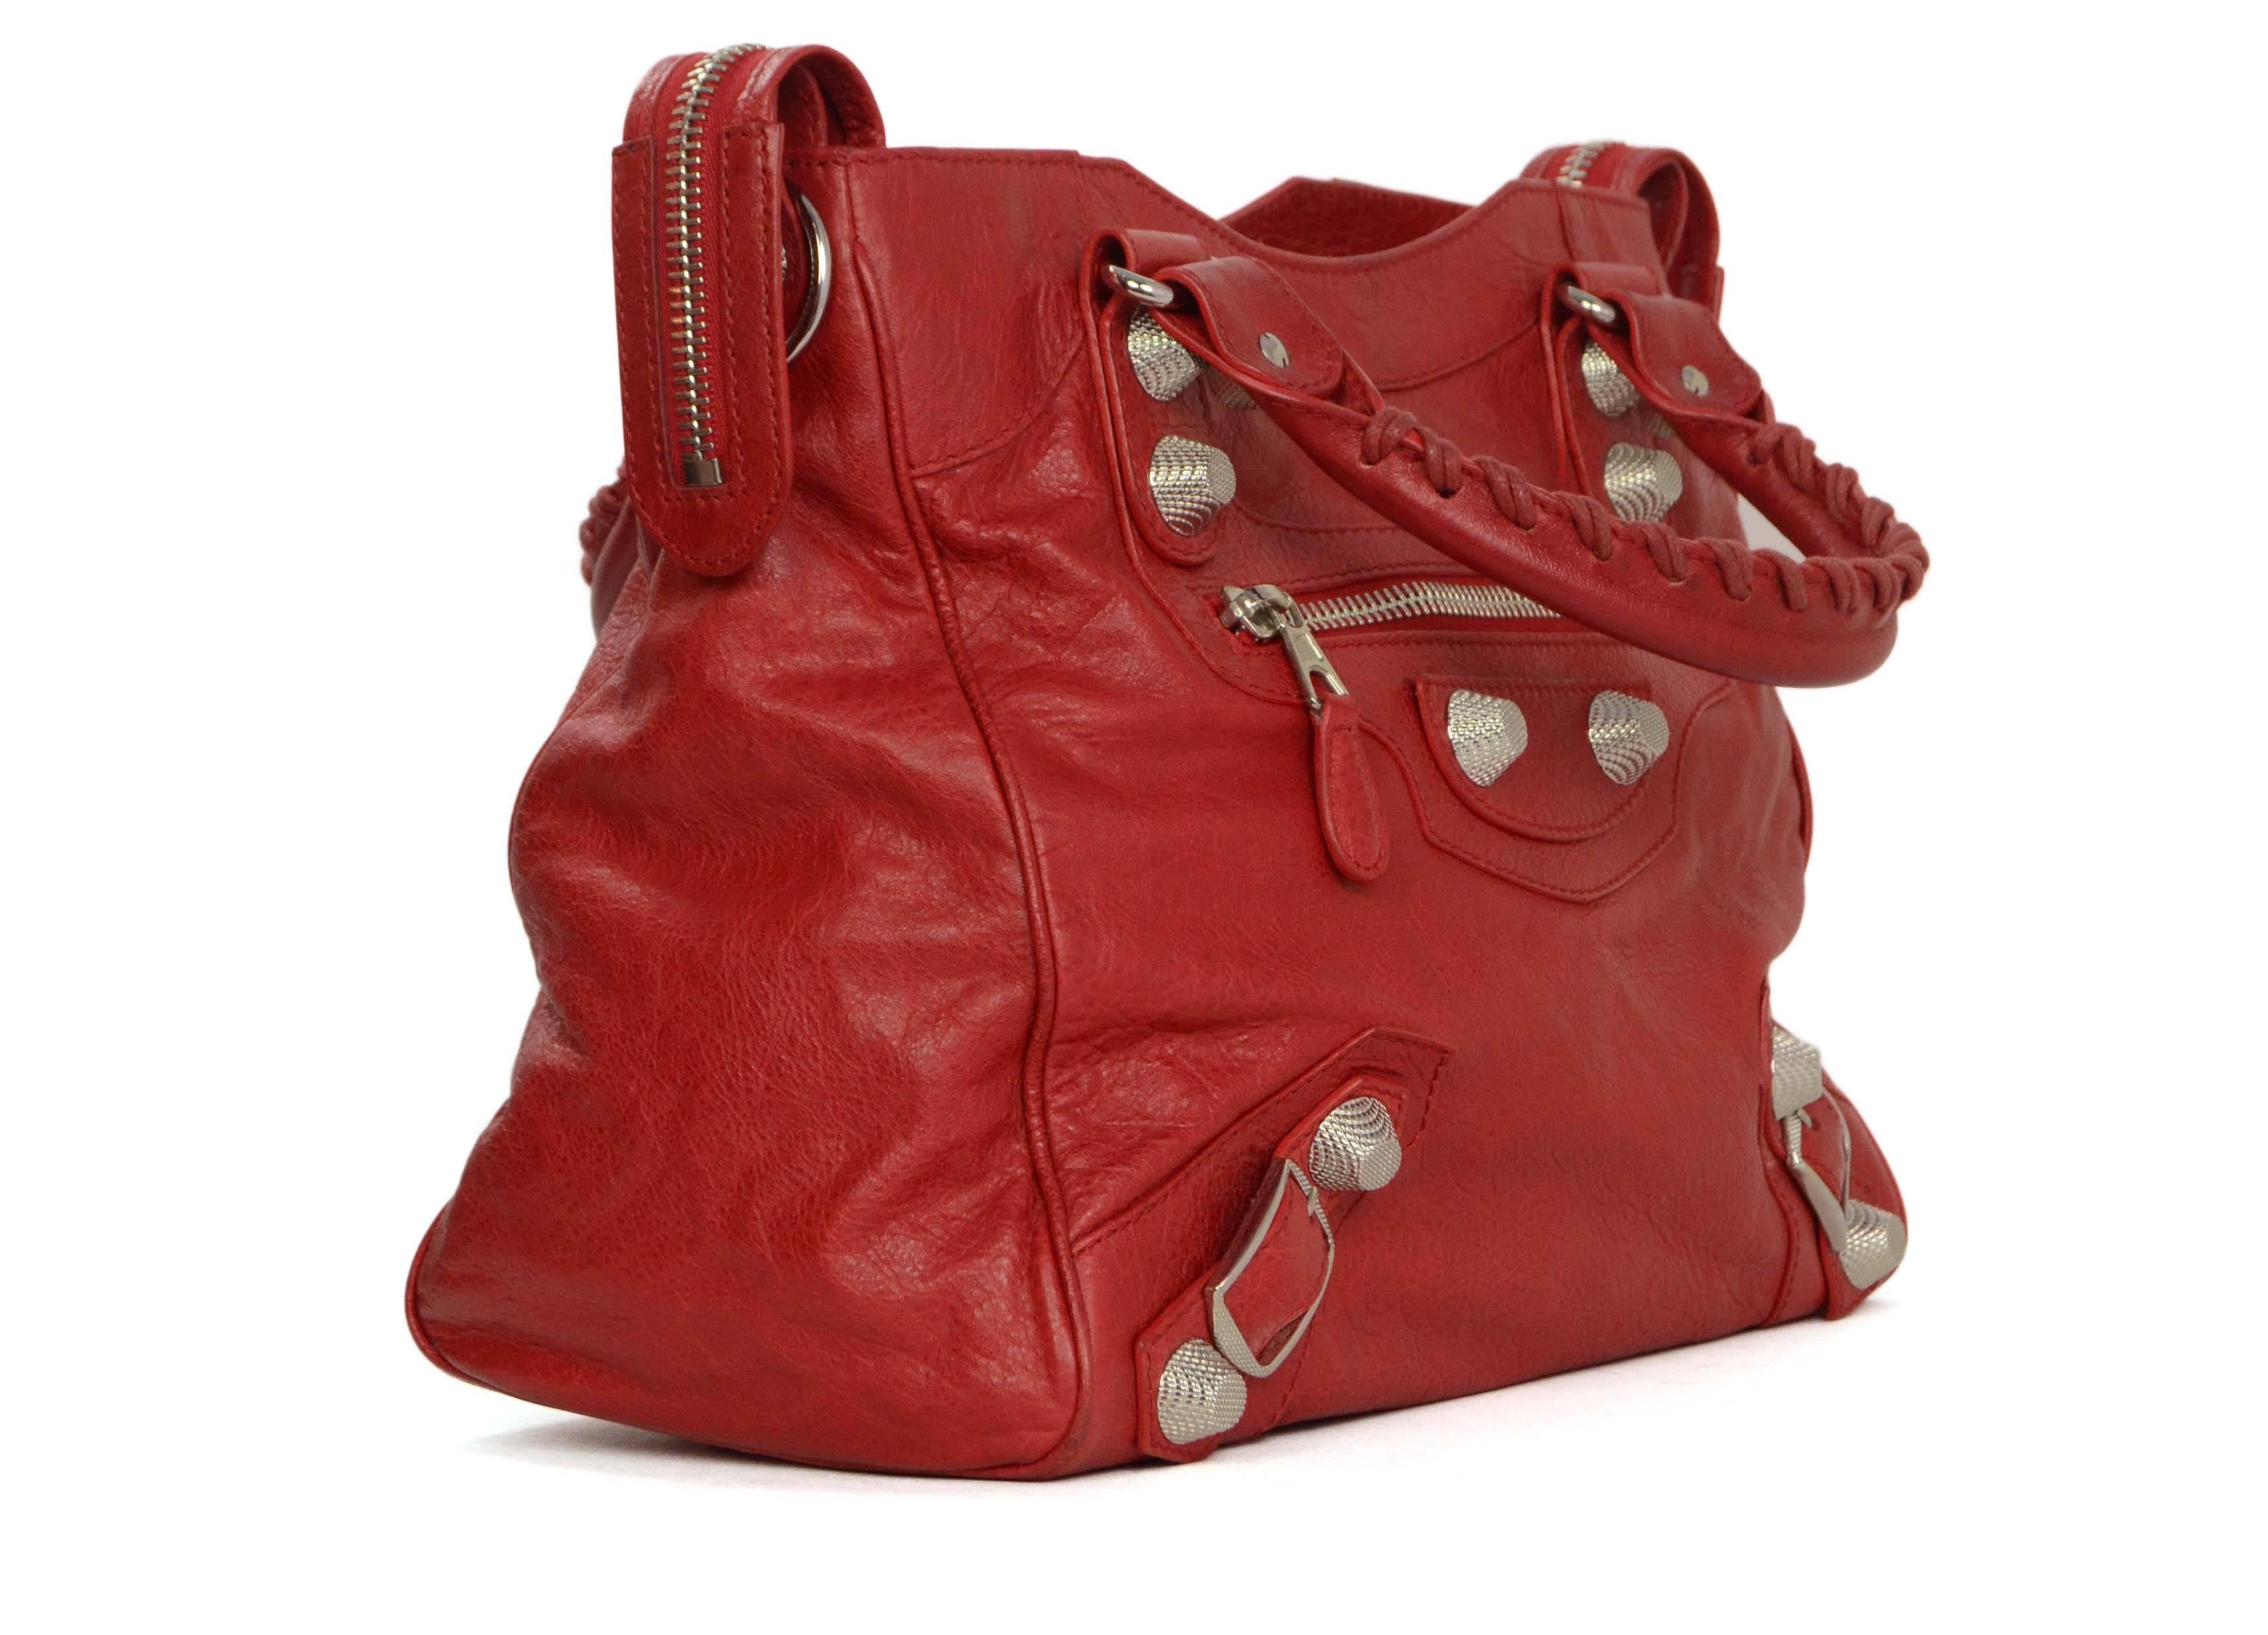 Balenciaga Red Distressed Leather Giant 21 Velo Bag 
Features optional crossbody strap
Made In: Italy
Color: Red
Hardware: Silvertone
Materials: Distressed leather and metal
Lining: Black canvas
Closure/Opening: Double zip across